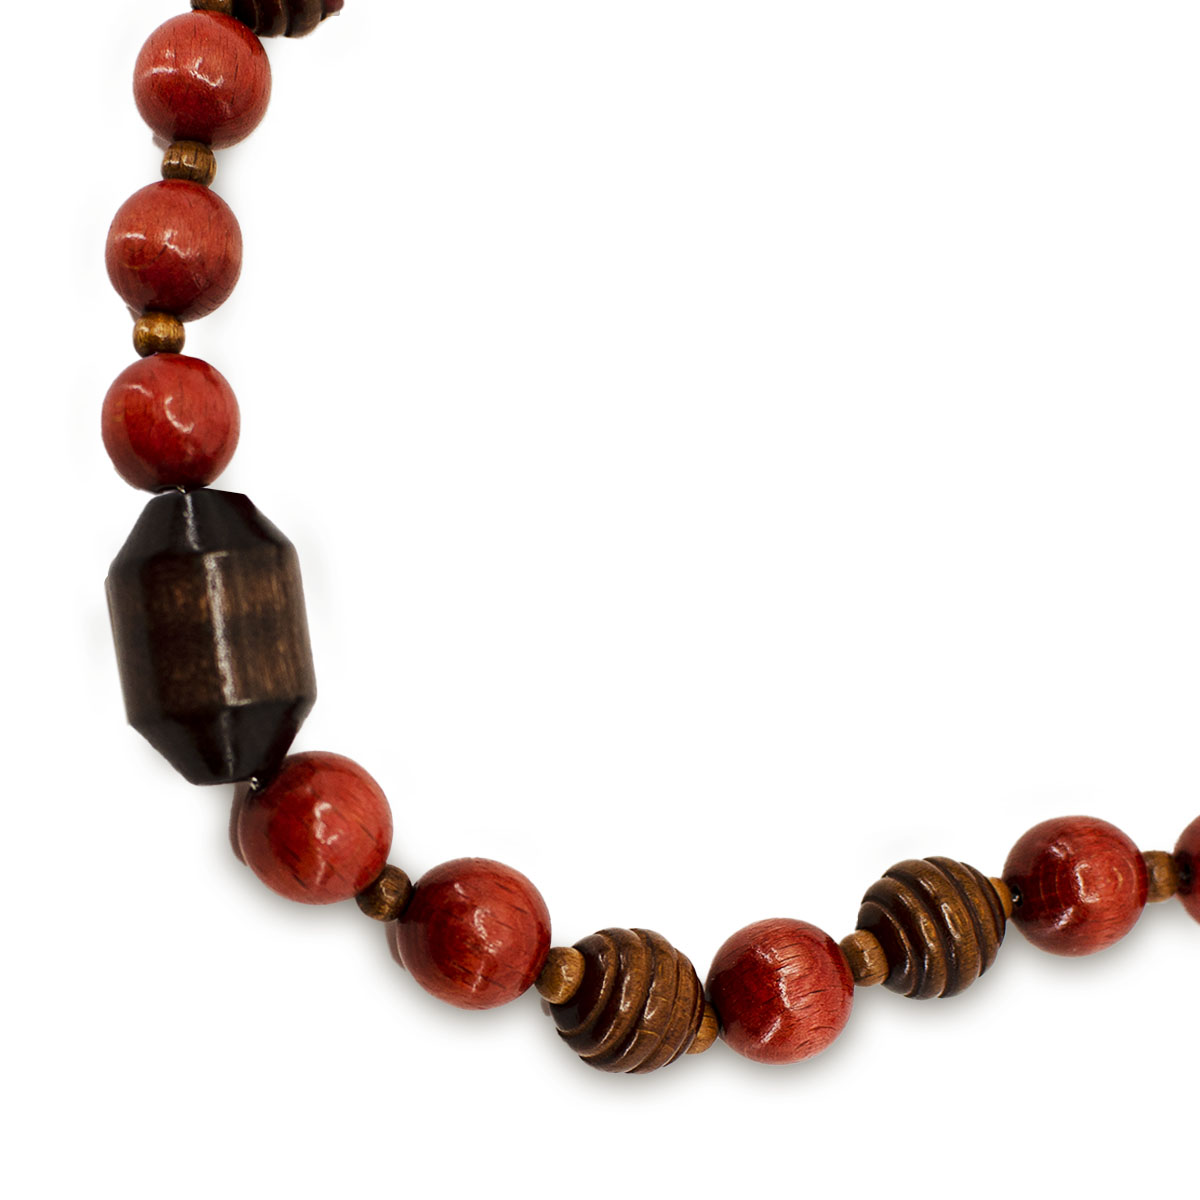 Brown wooden beads